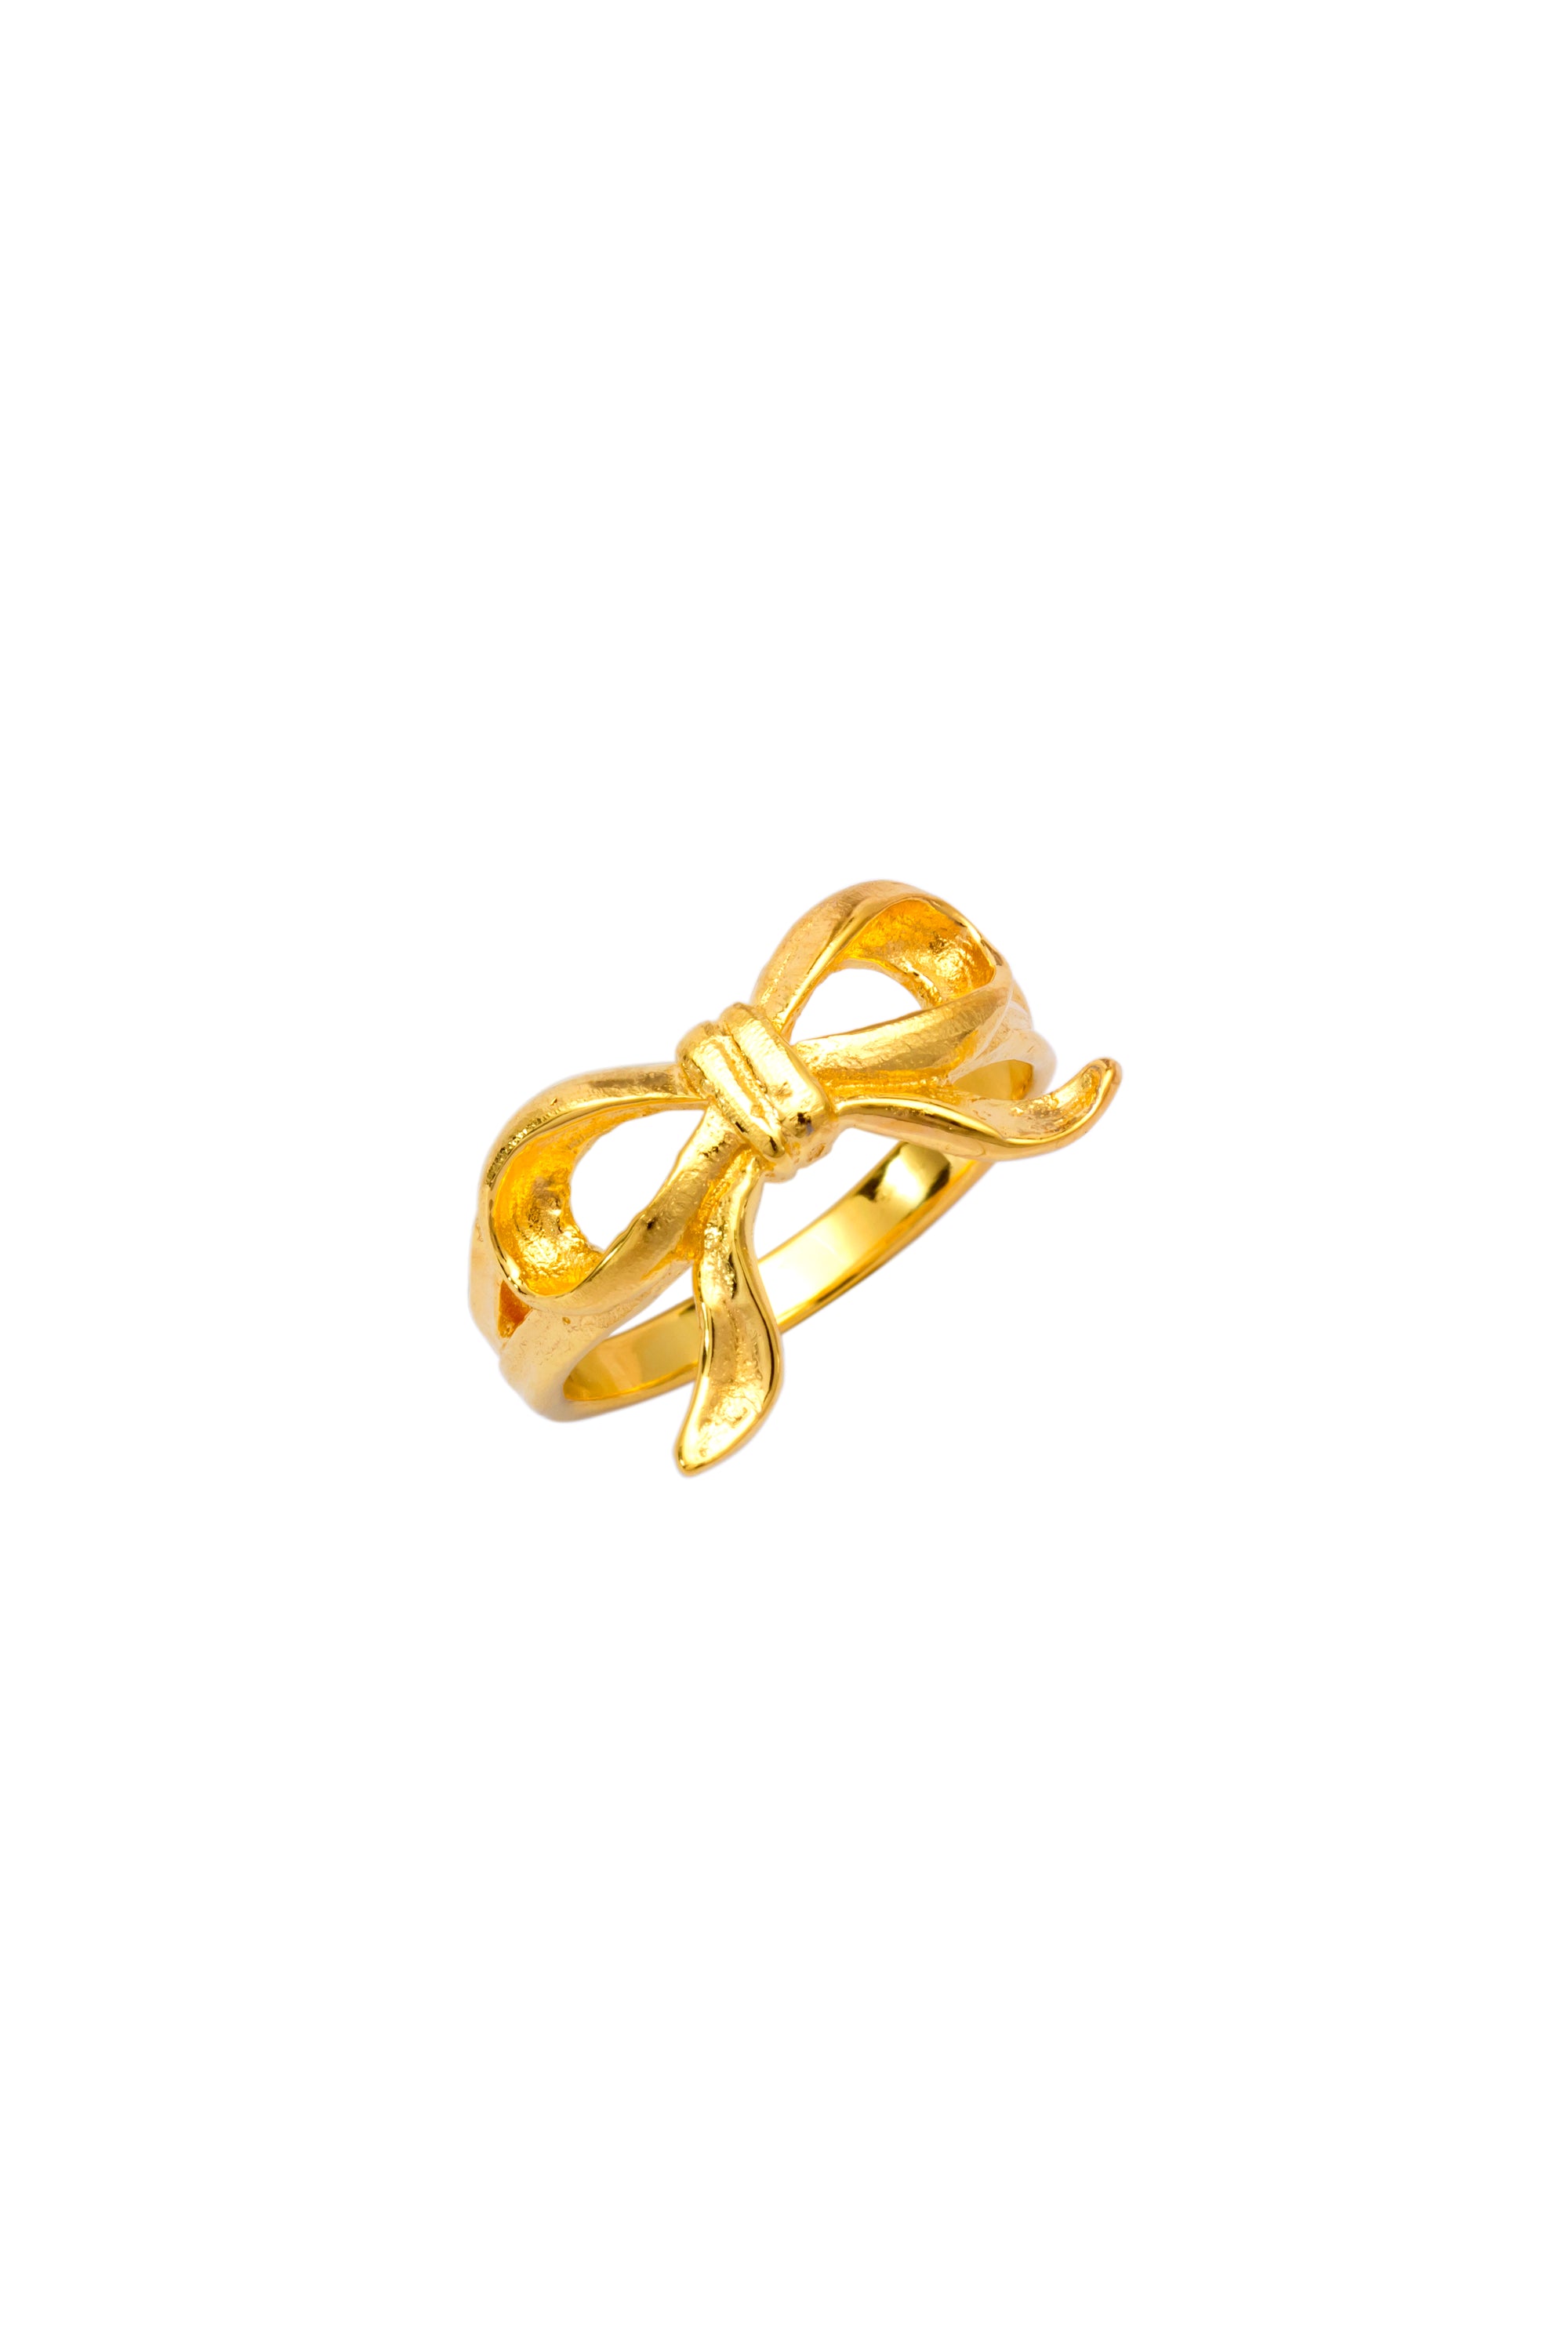 BOW PEEP RING GOLD